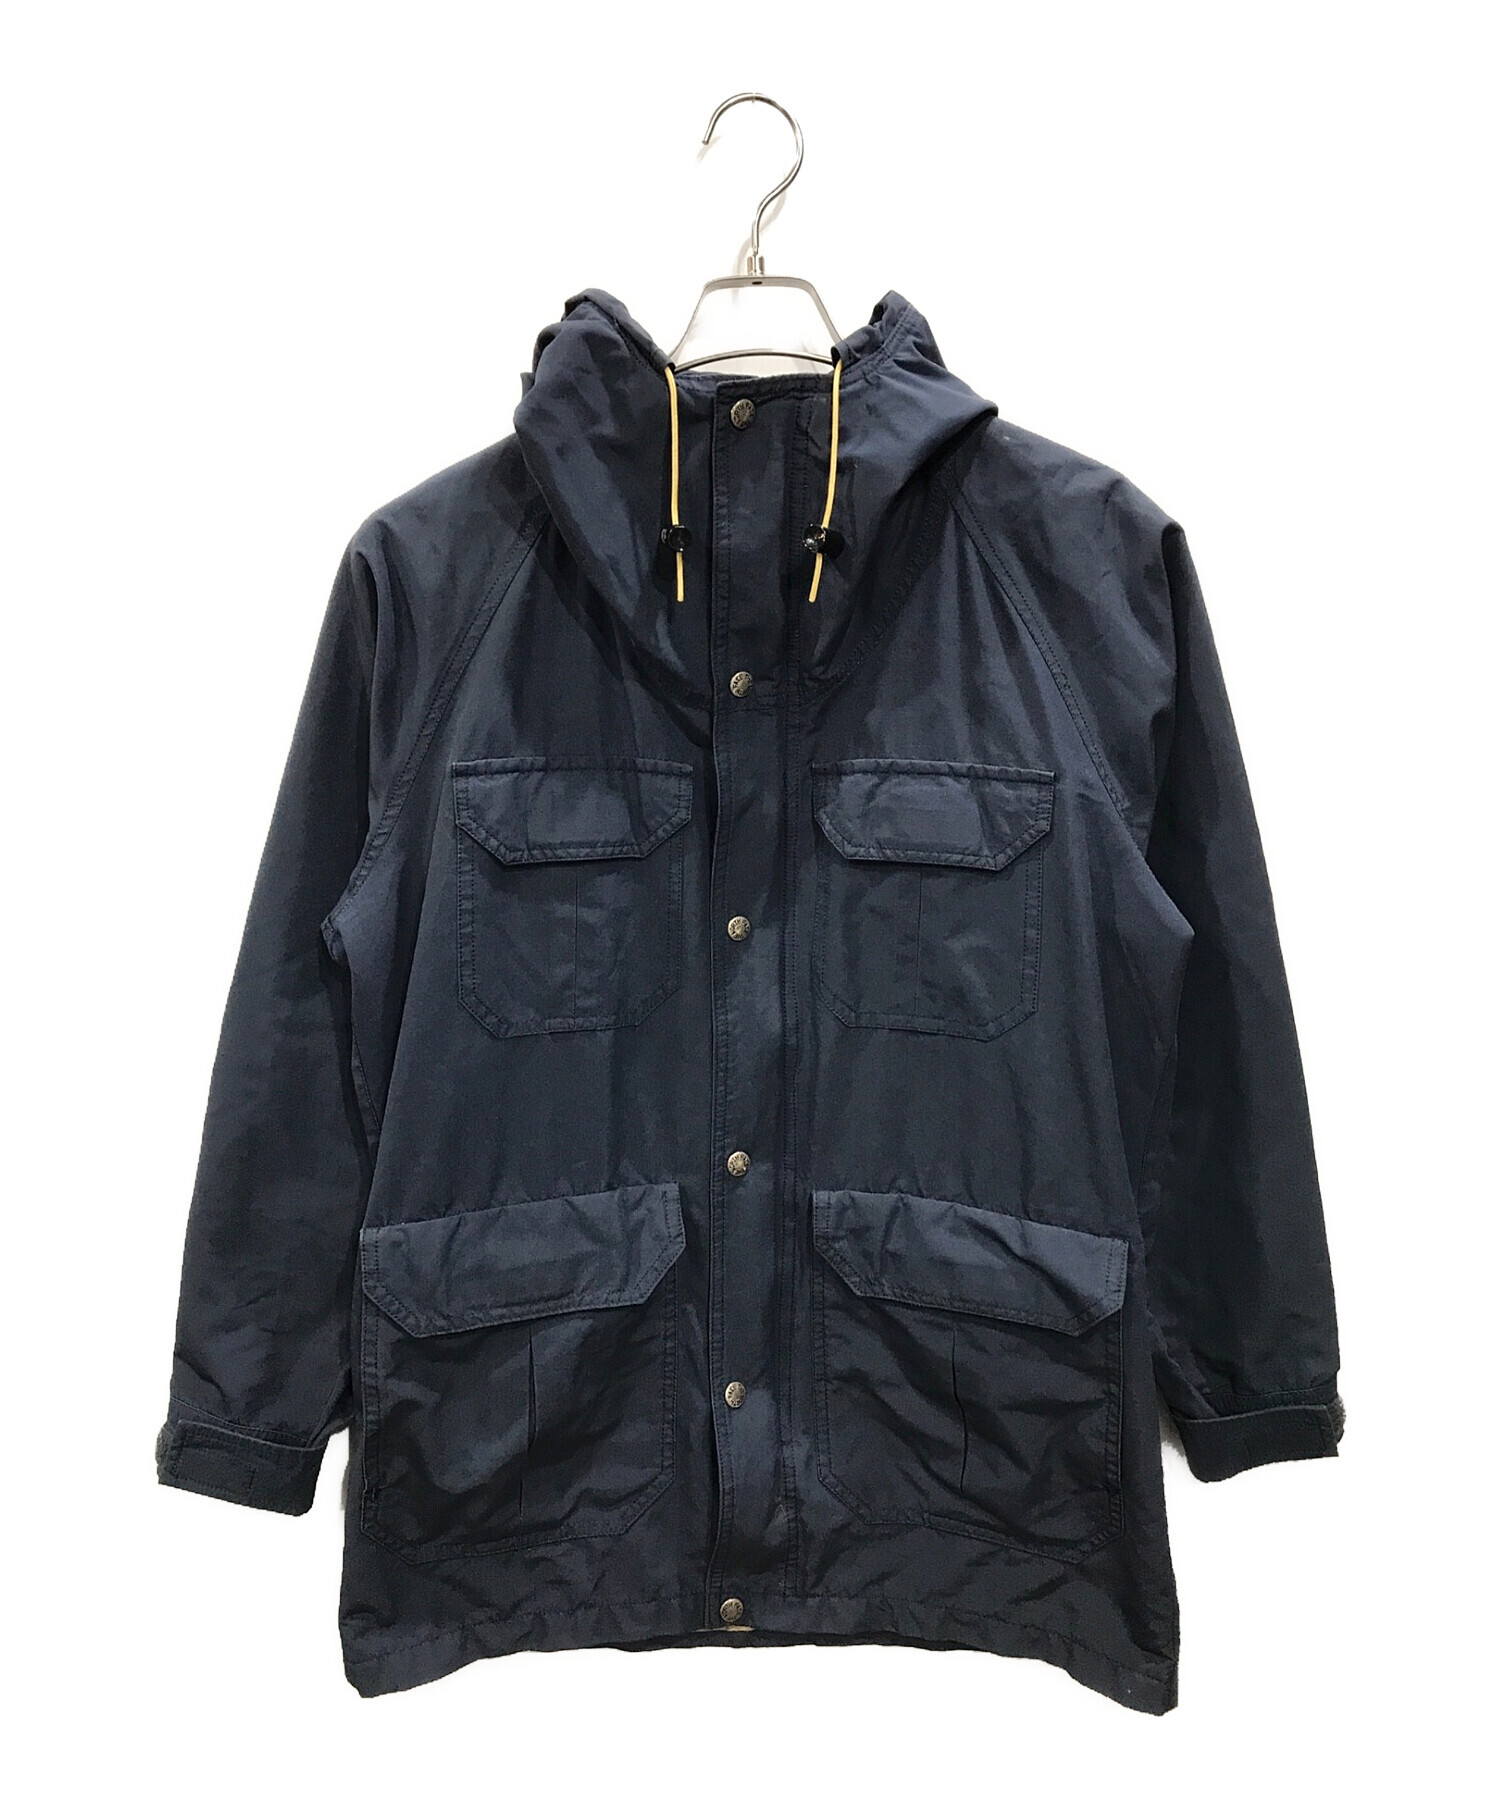 THE NORTH FACE PURPLE LABEL◇マウンテンパーカ/65/35 Grizzly Peak